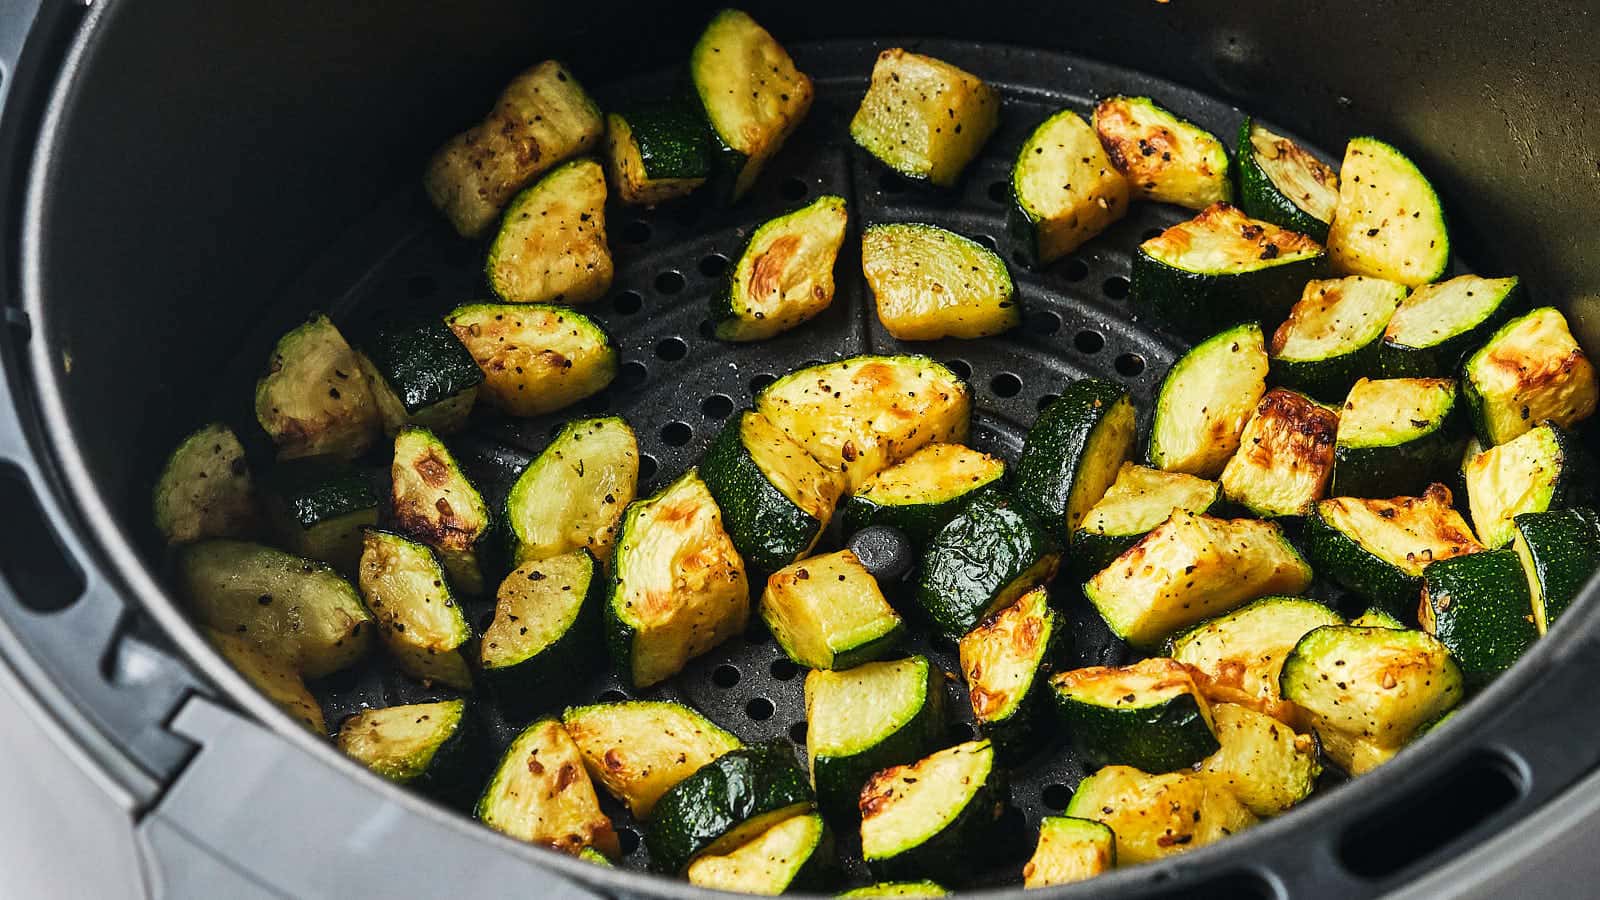 Air Fryer Zucchini recipe by Cheerful Cook.